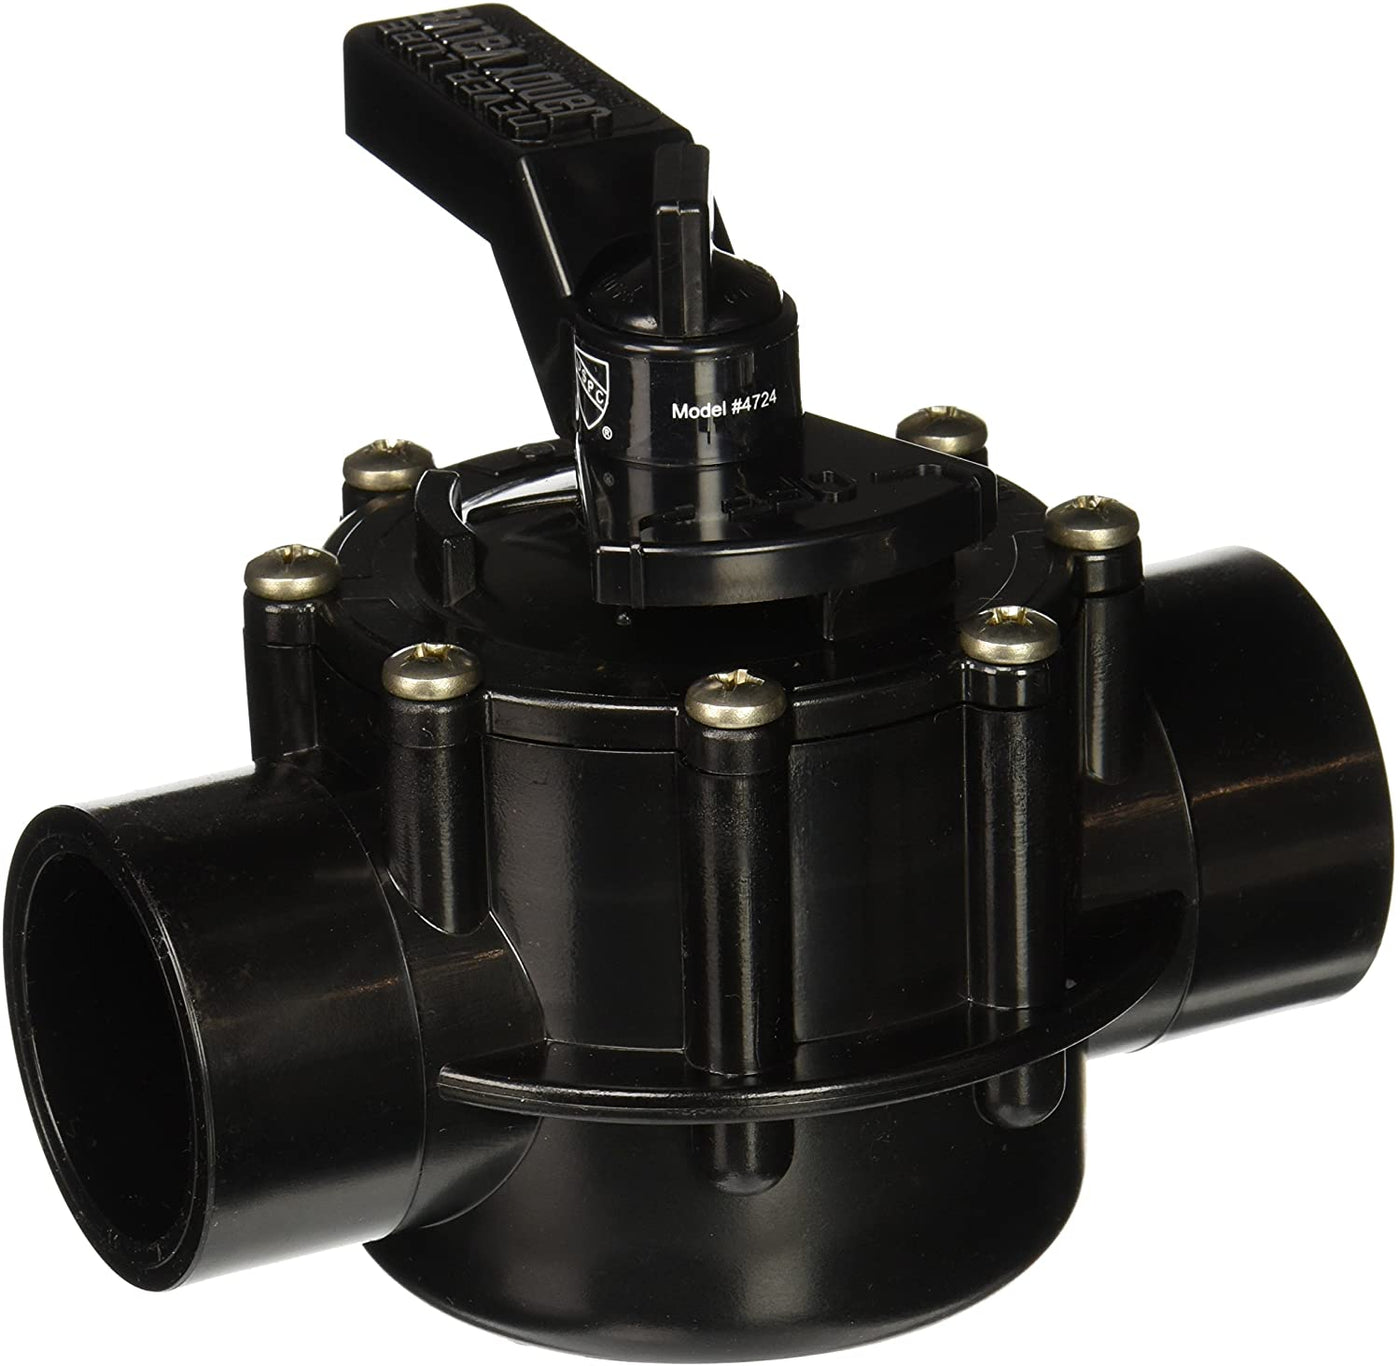 Jandy 4724 2-Port 1-1/2 to 2-Inch Positive Seal NeverLube Valve